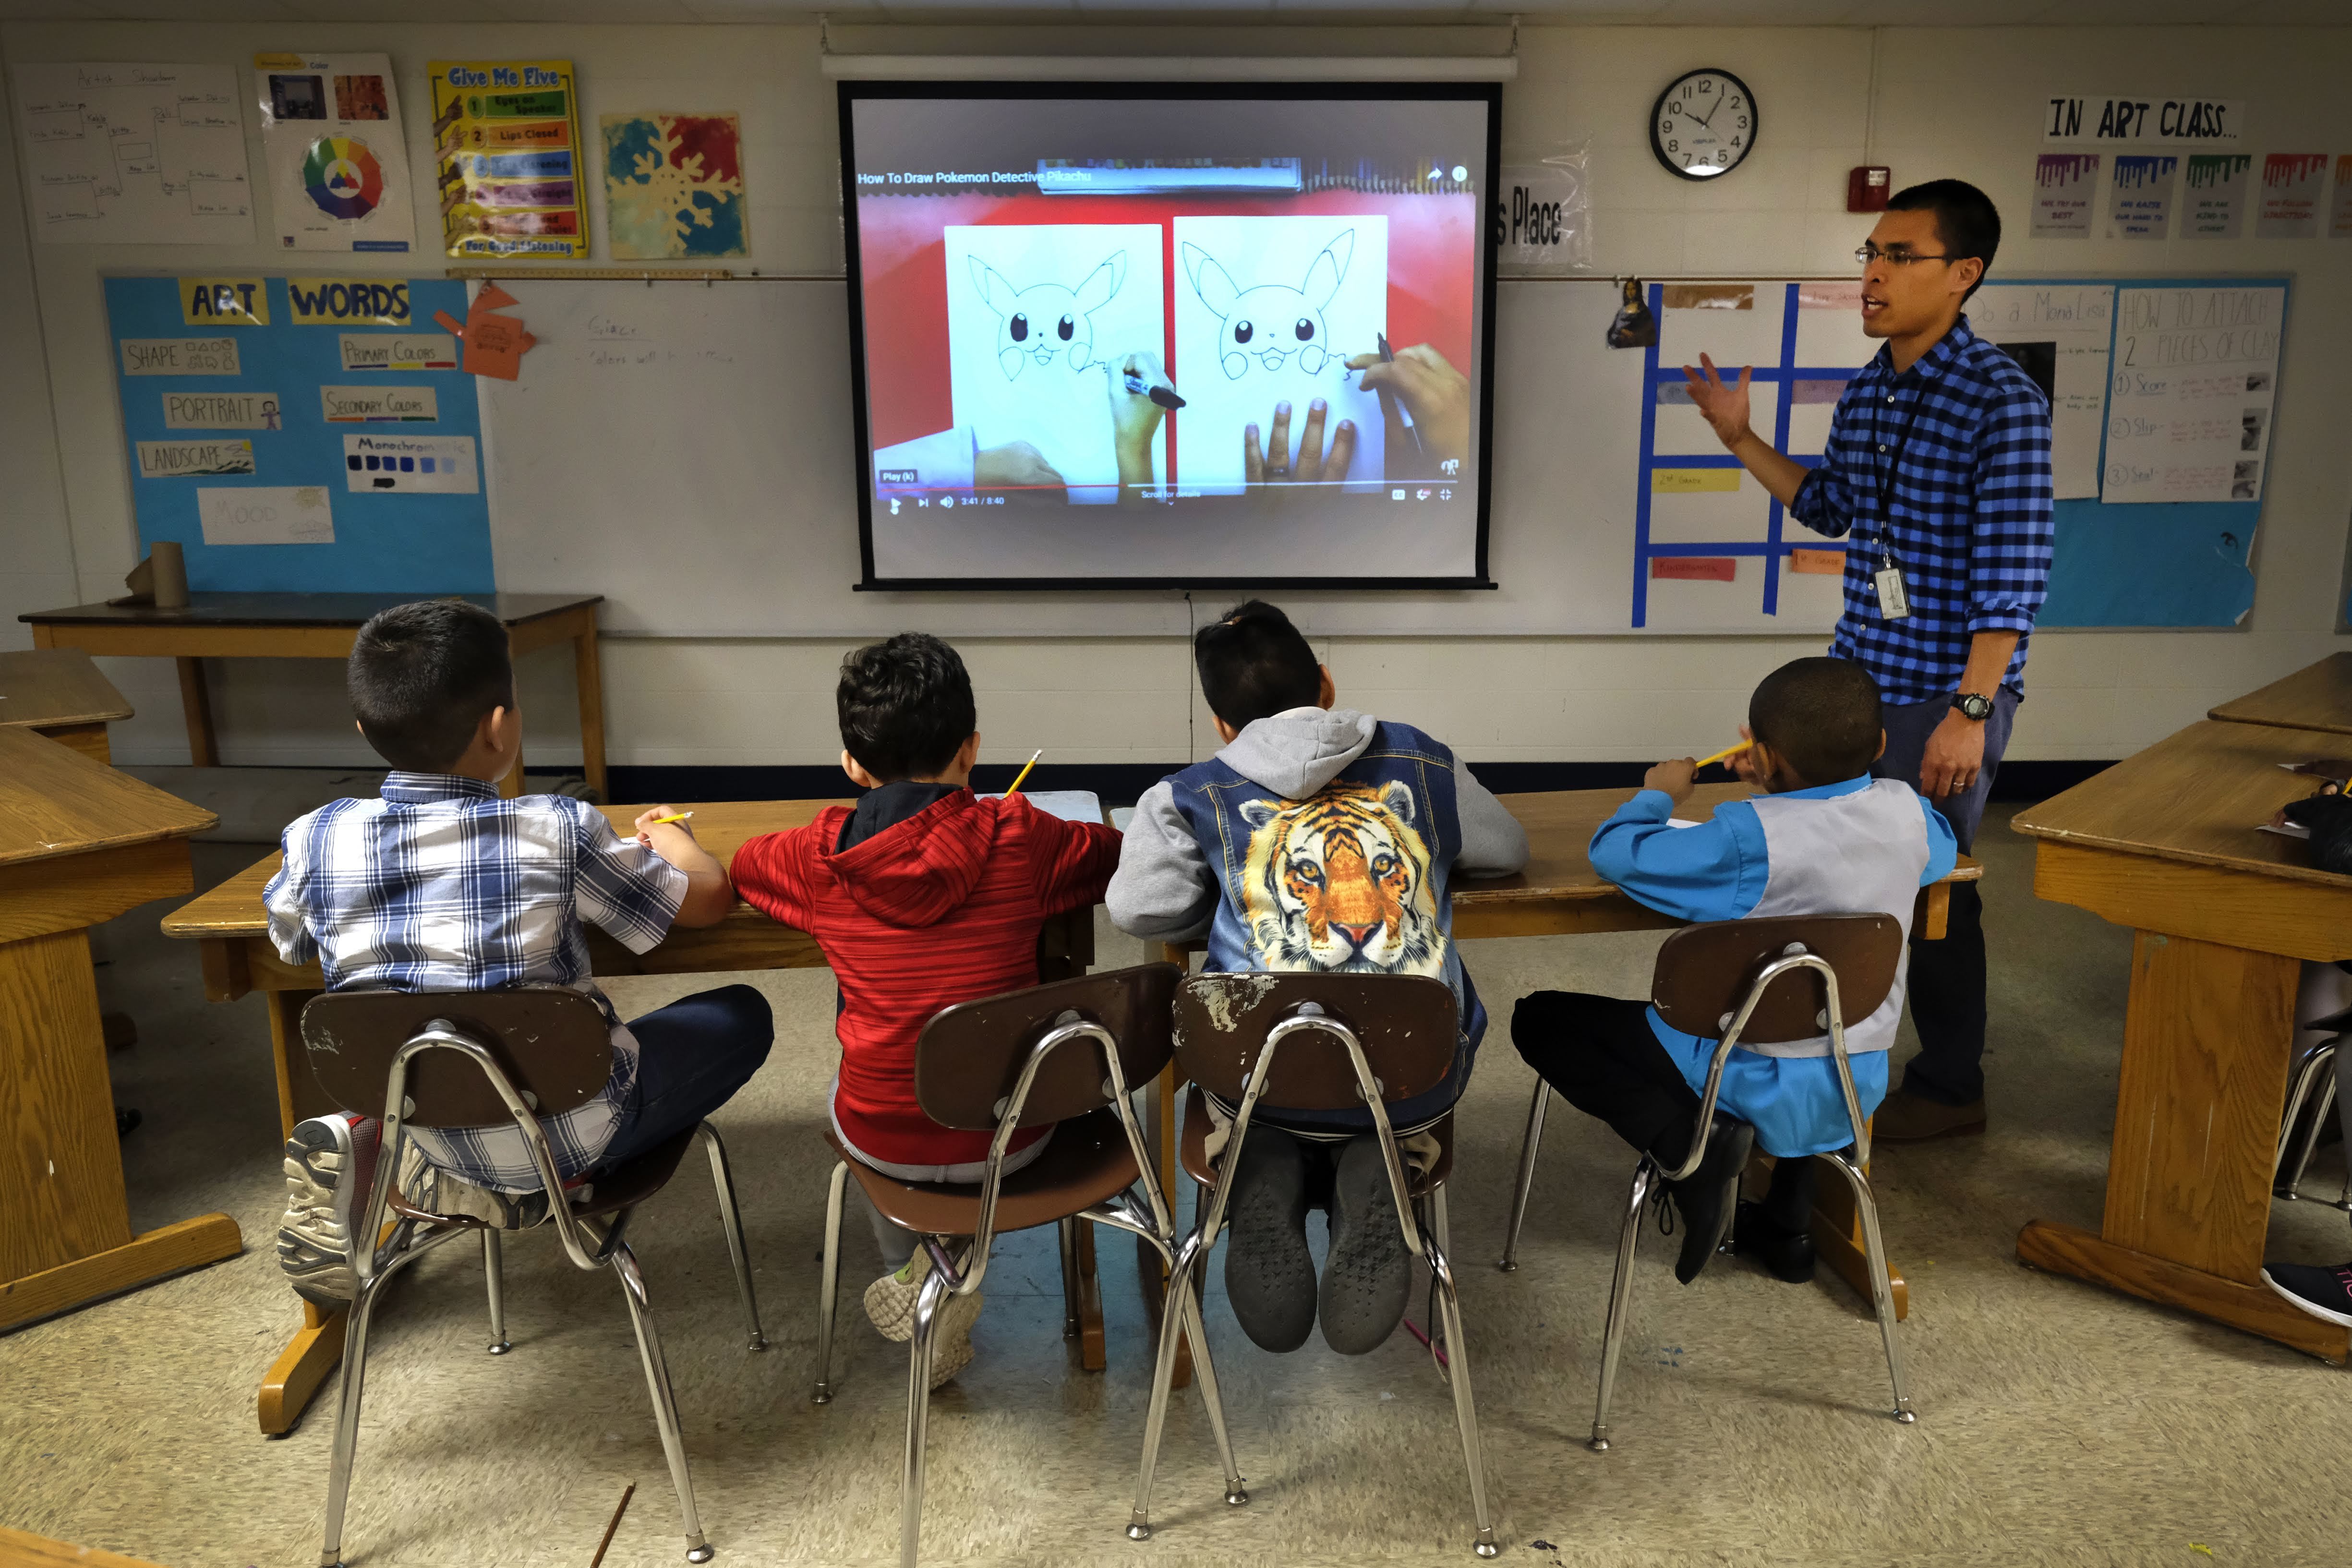 An April 2019 photo shows a teacher next to a smart board talking to four male students sitting at a table and looking at the board.